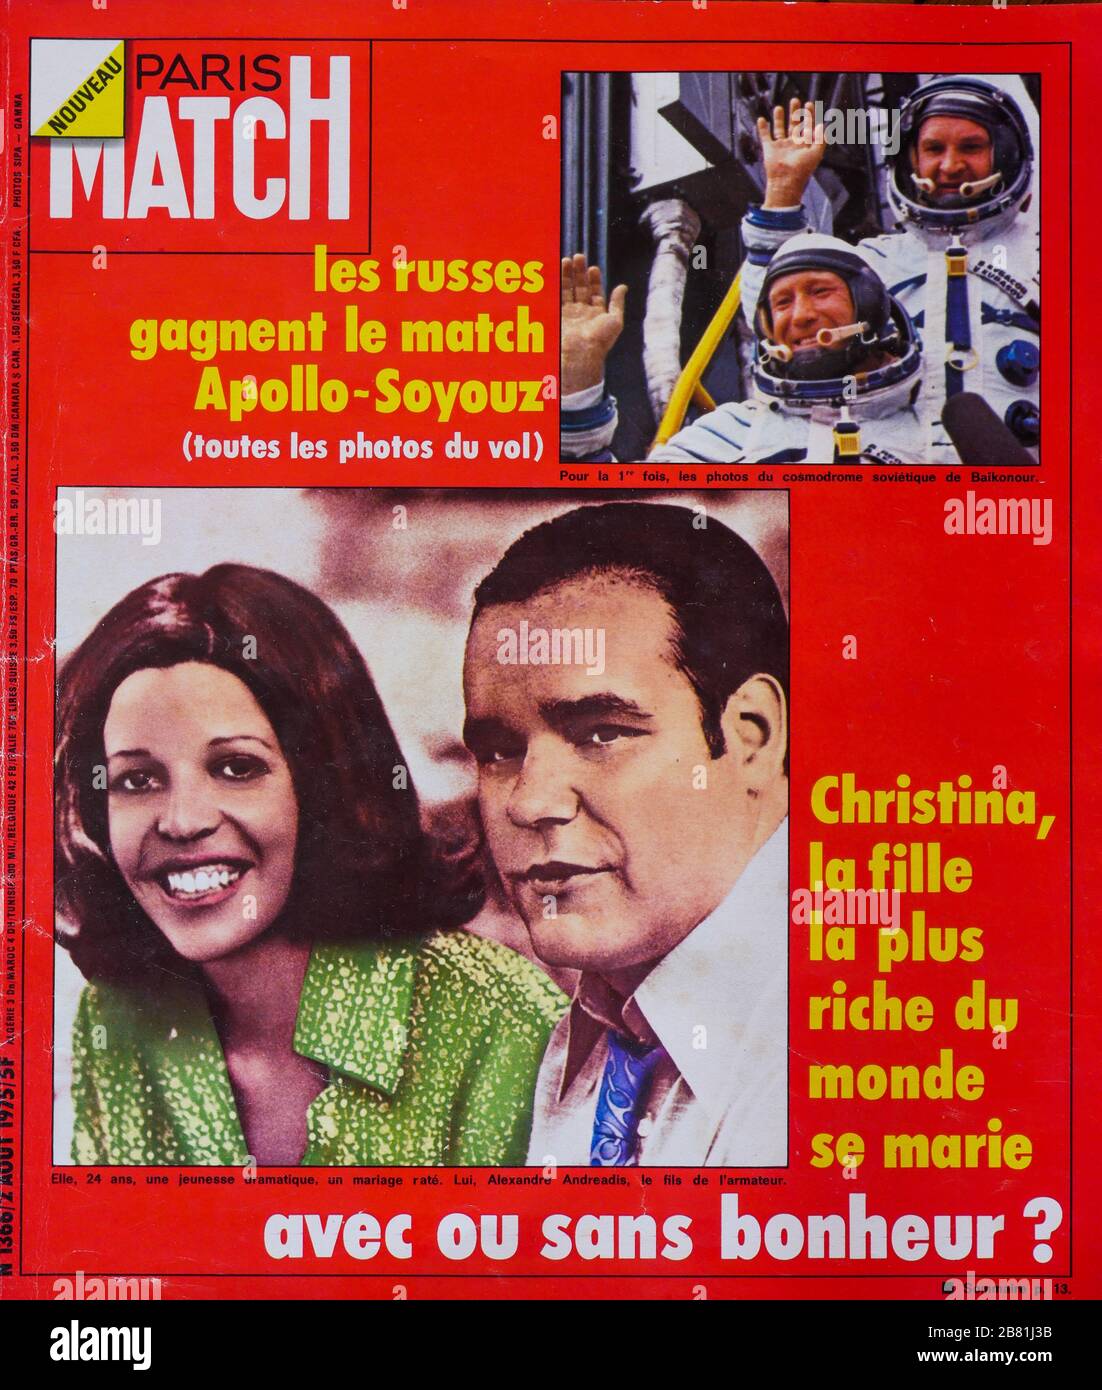 Frontpage of French news and people magazine Paris-Match, n° 1366, August 2th 1975, 'Russian win the Apollo-Soyouz match' and Christina Onassis, the richest girl in the world get married',1975, France Stock Photo